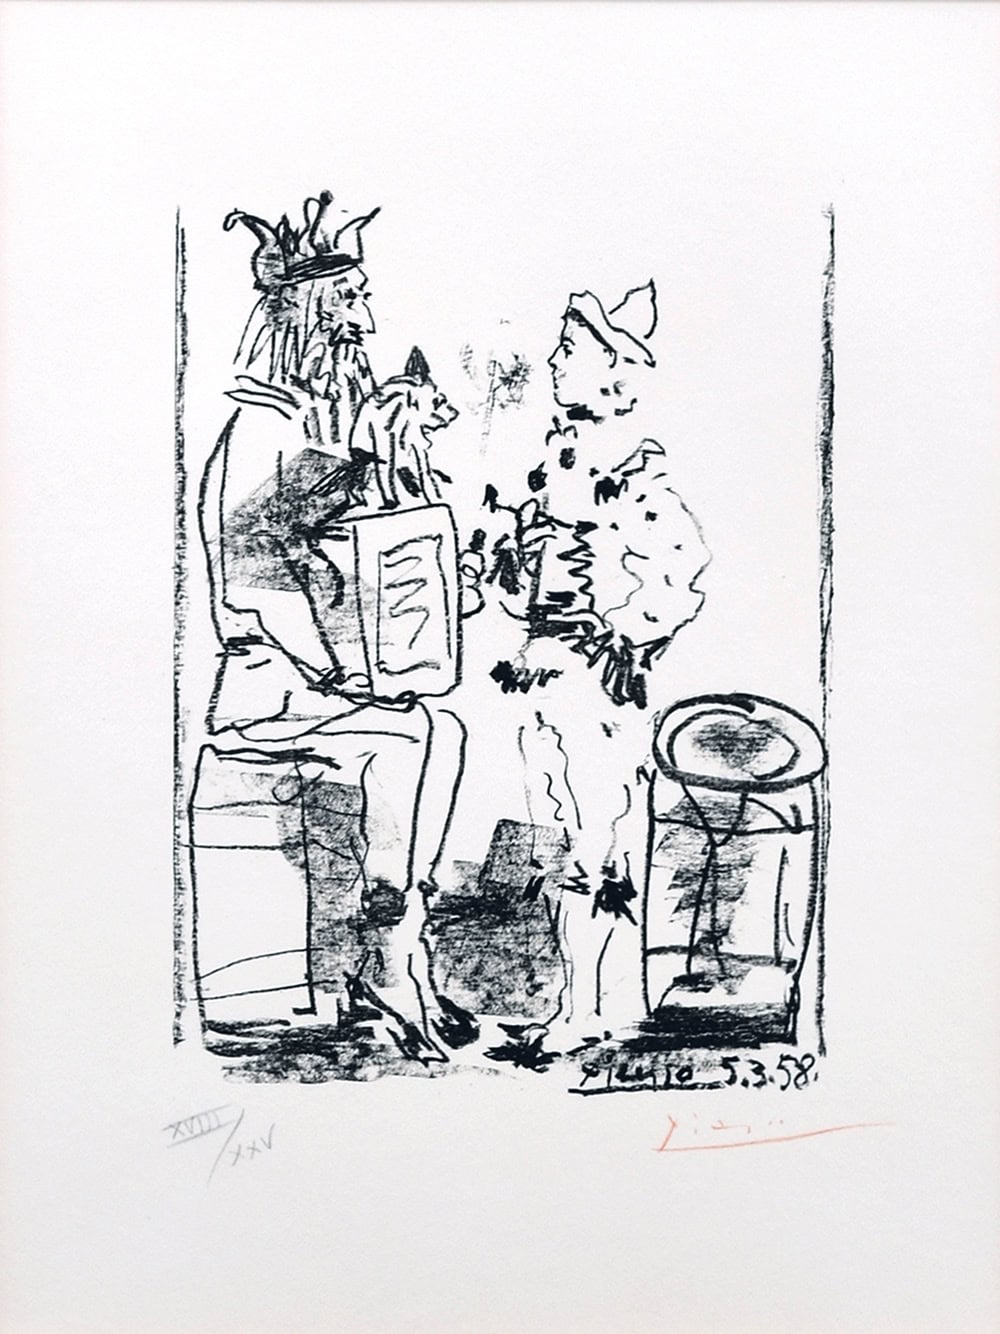 Pablo Picasso, Les Satimbanques (The Tumblers), 1958 from Souvenirs D